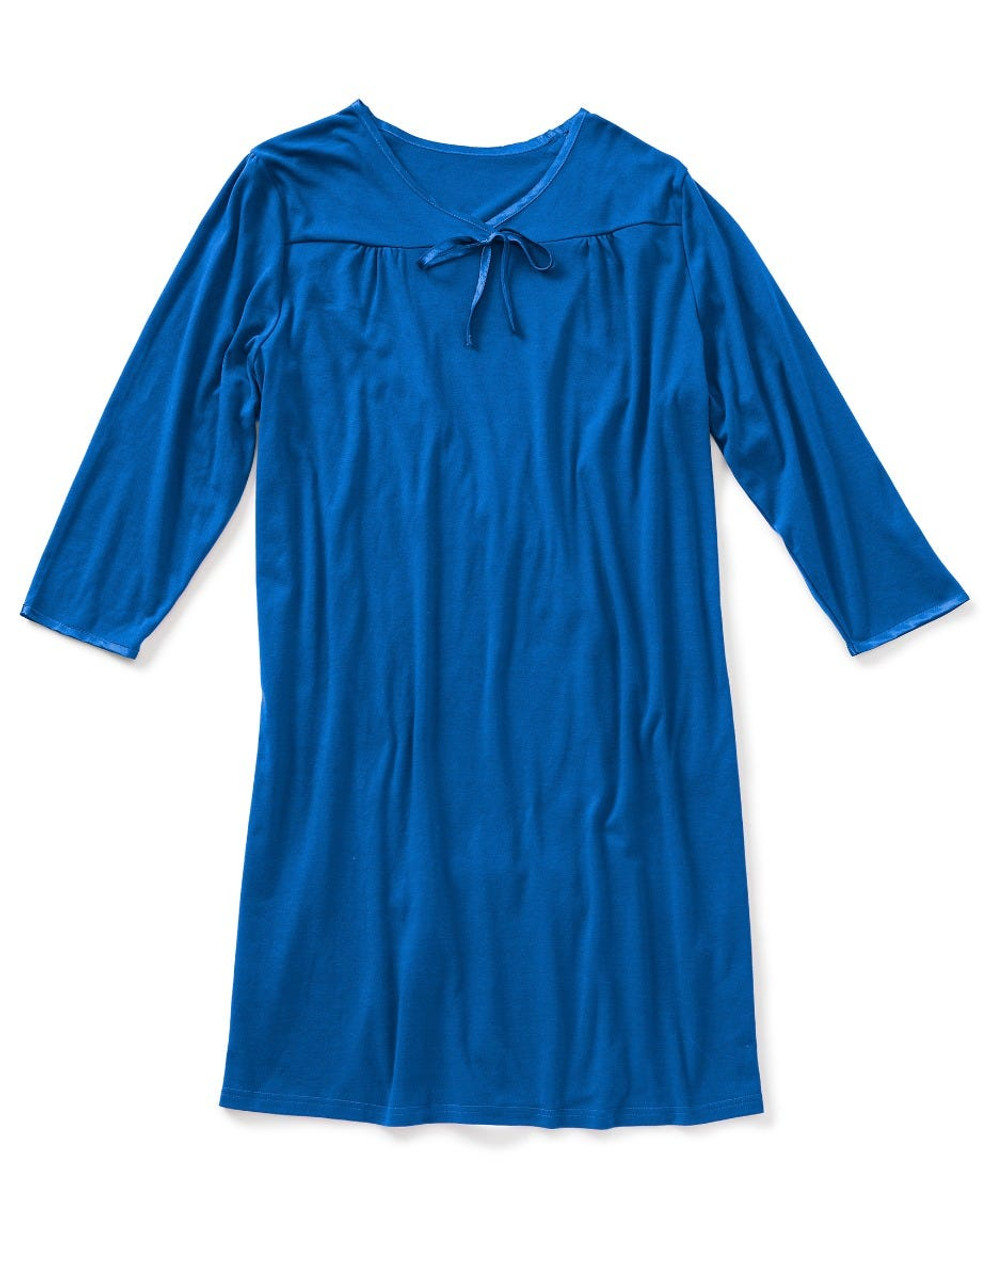 Silverts SV26120 Women's Antimicrobial Open Back Nightgown Blue, Size=M, SV26120-SV15-M